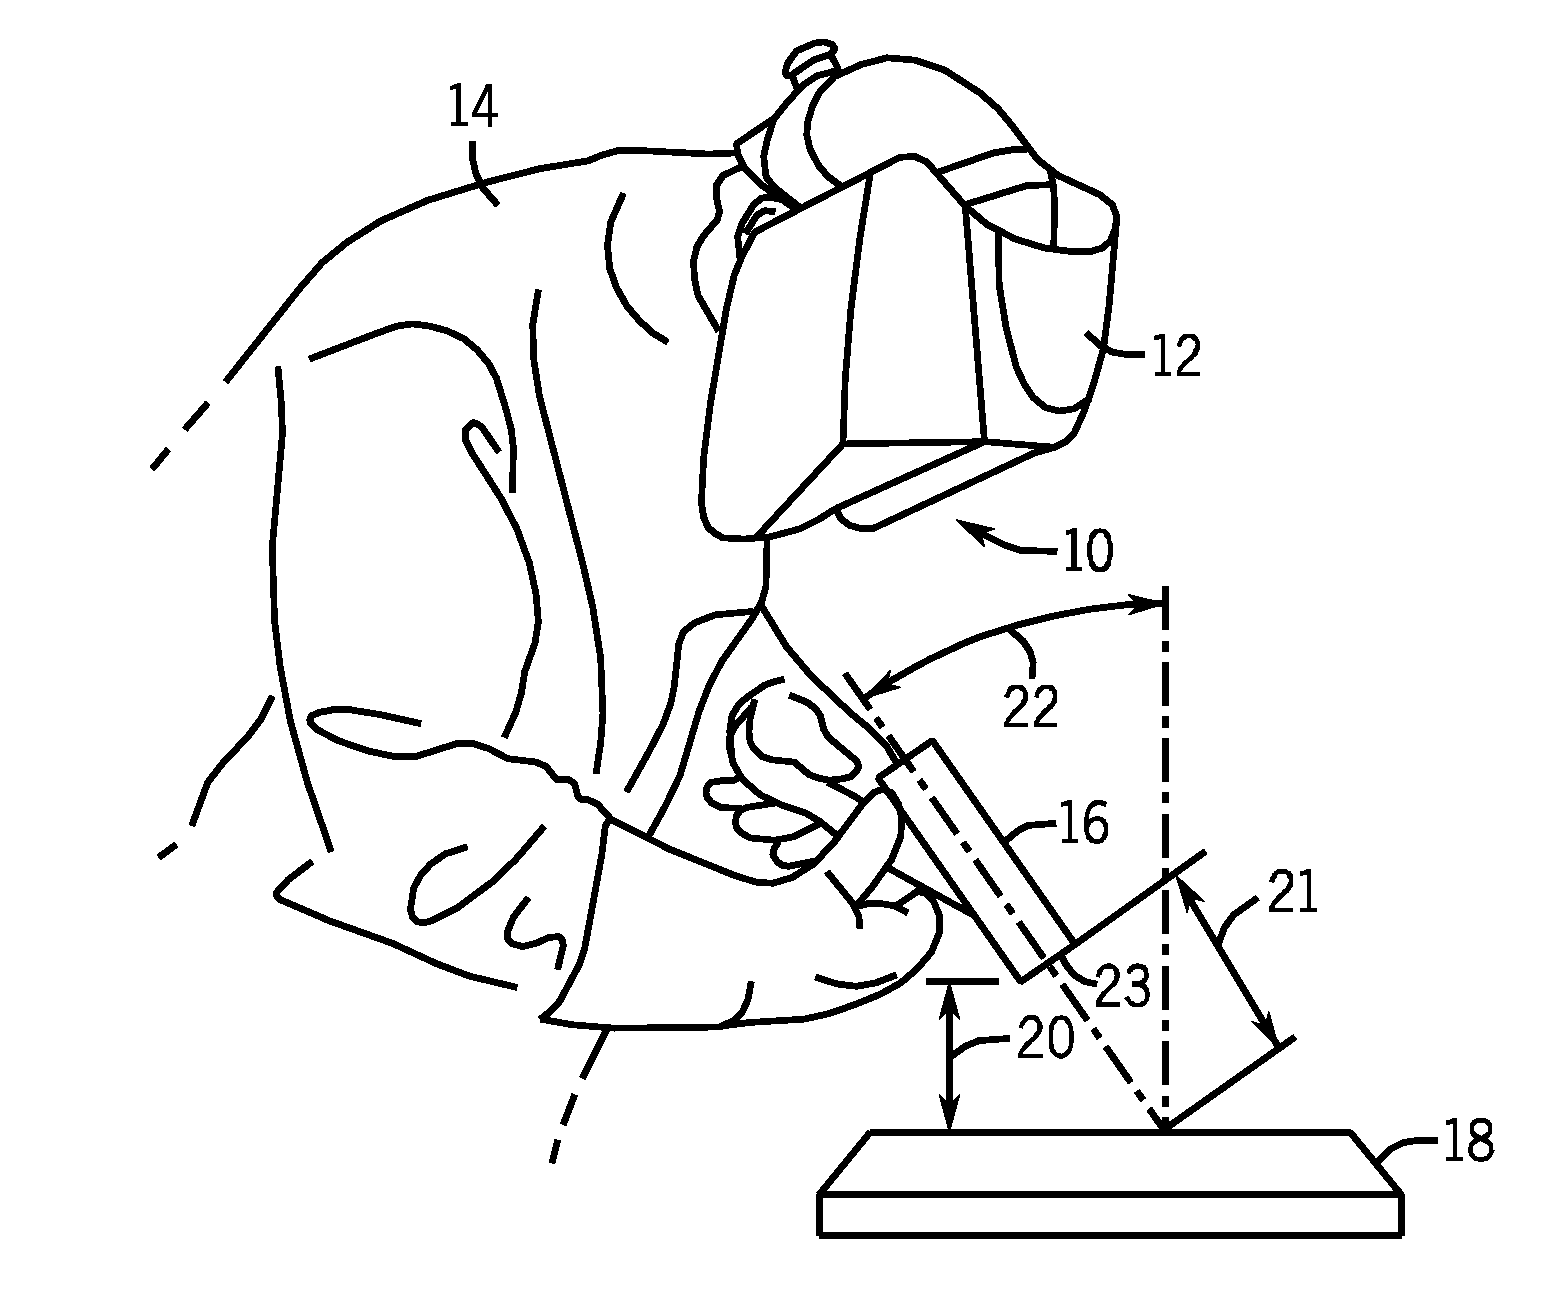 Weld characteristic communication system for a welding mask